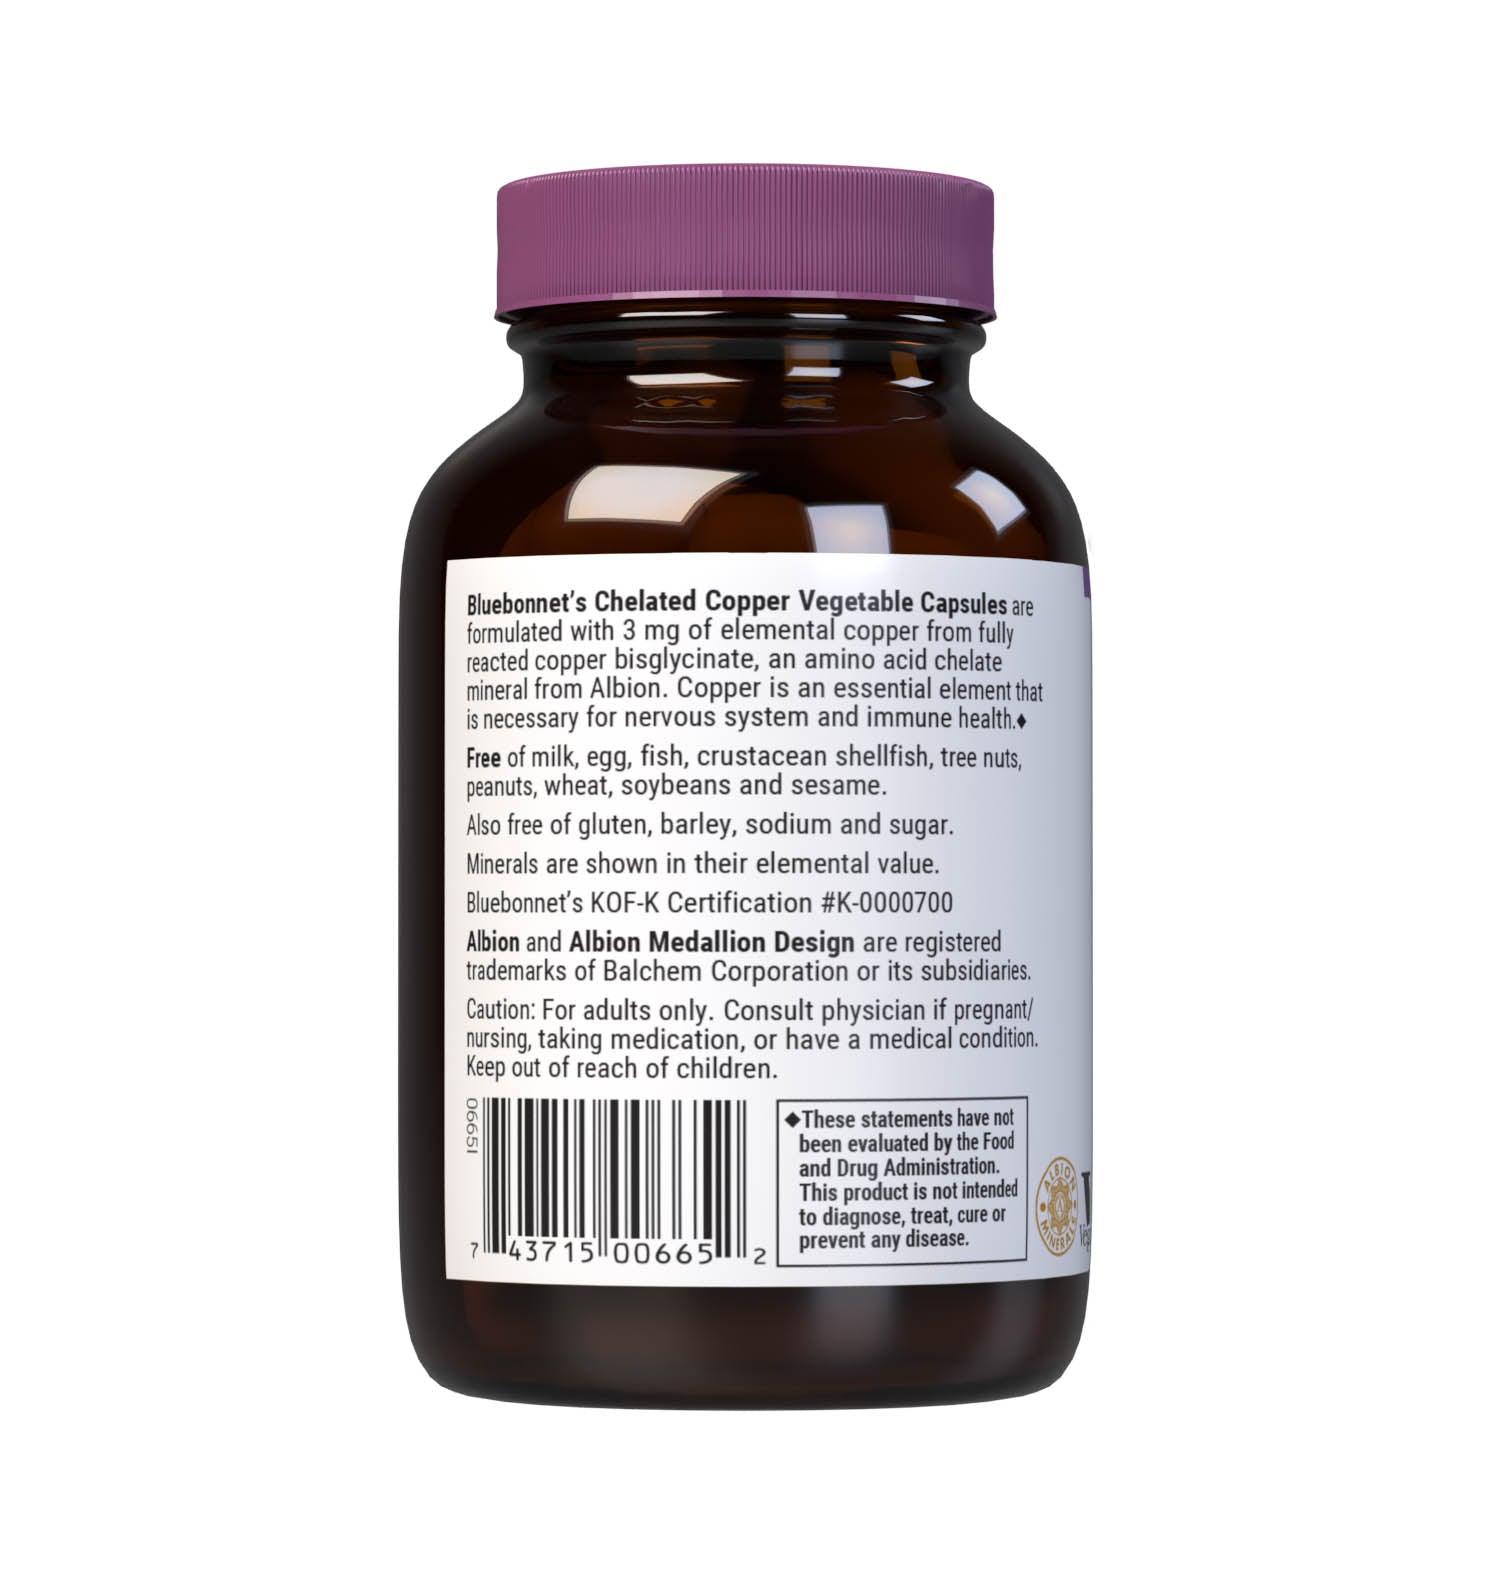 Bluebonnet's Chelated Copper 90 Vegetable Capsules are formulated with 3 mg of elemental copper from fully reacted copper bisglycinate, an amino acid chelate mineral from Albion. Copper is an essential element that is necessary for nervous system and immune health. Description panel. #size_90 count